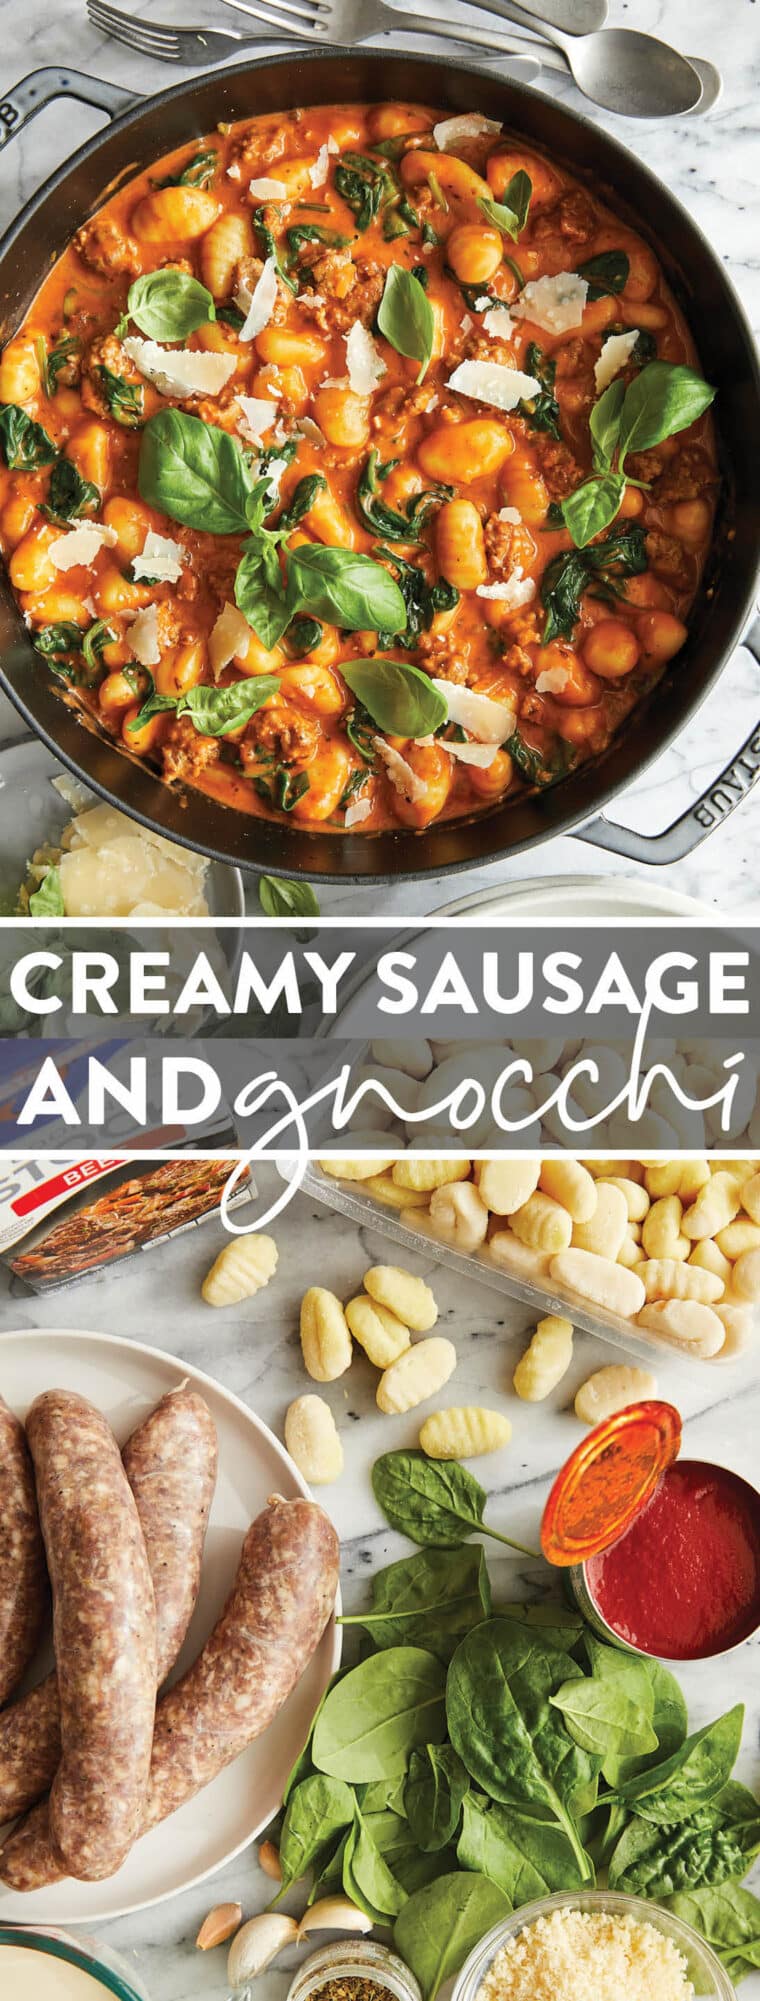 Creamy Sausage Gnocchi - A quick 30 min ONE POT meal! With crumbled Italian sausage, sneaked in spinach and the best tomato cream sauce ever!